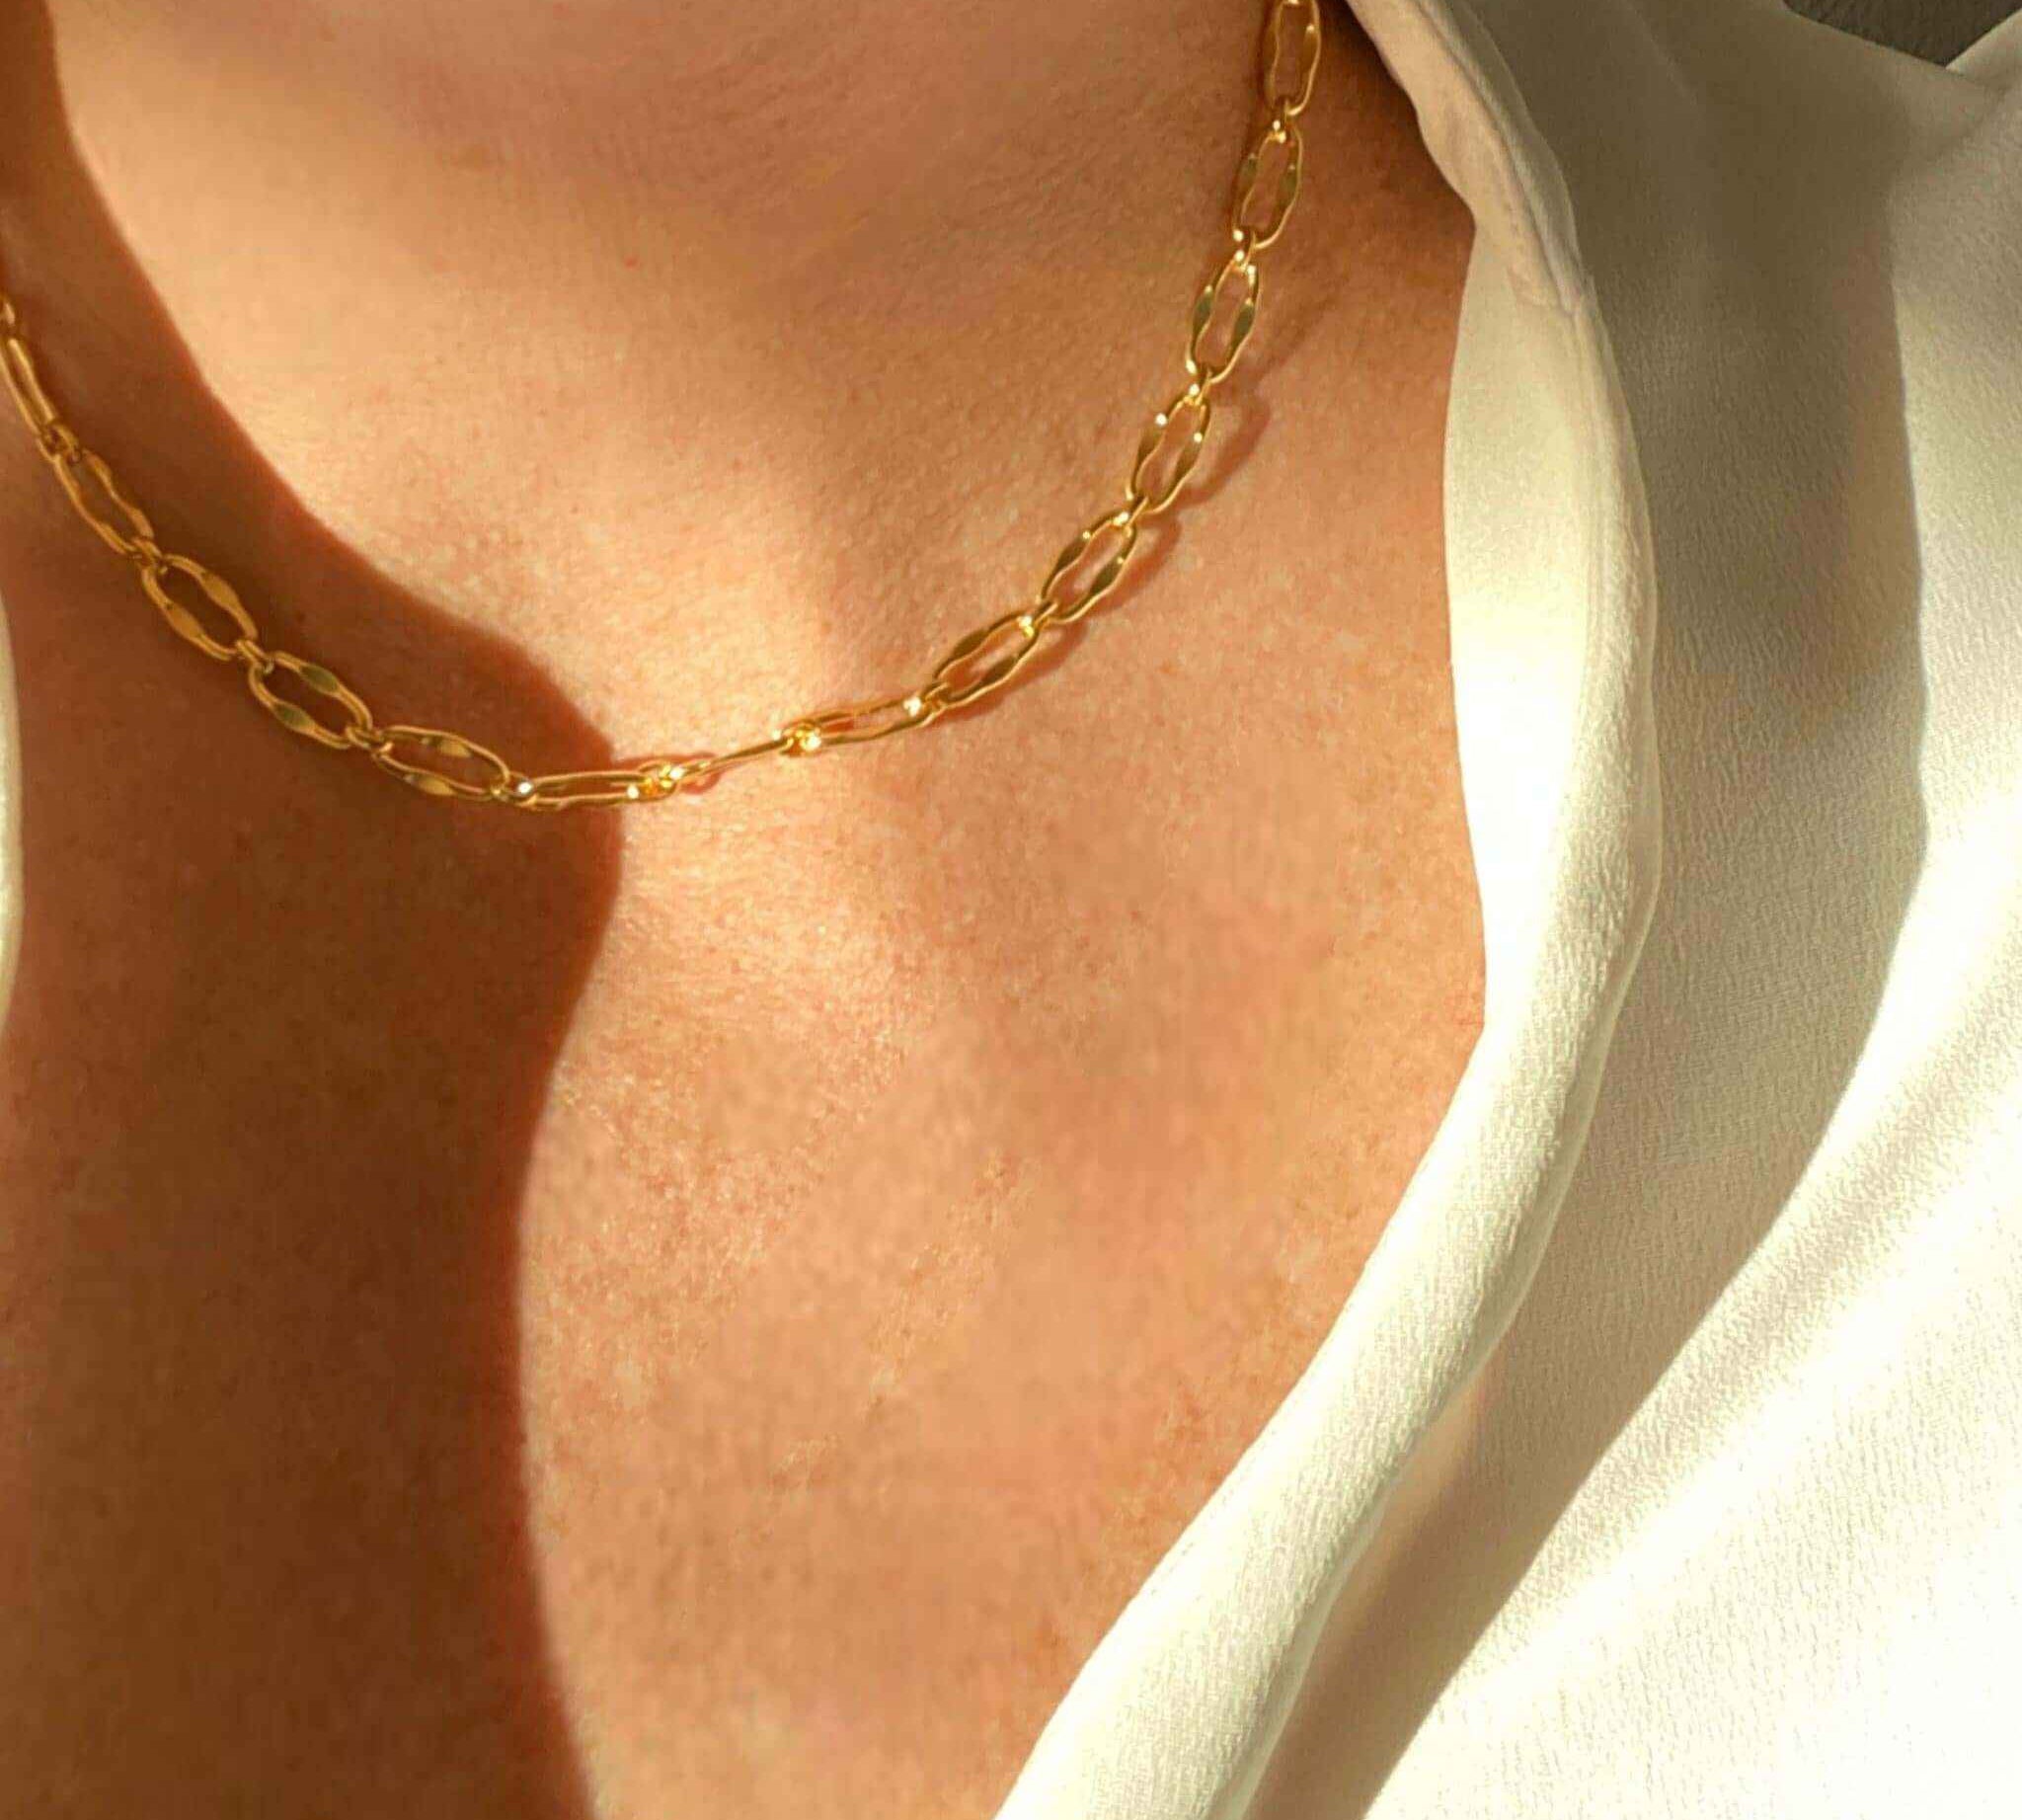 Close-up view of the T-Bar Link design in gold, a modern jewelry piece by Alessandra James.